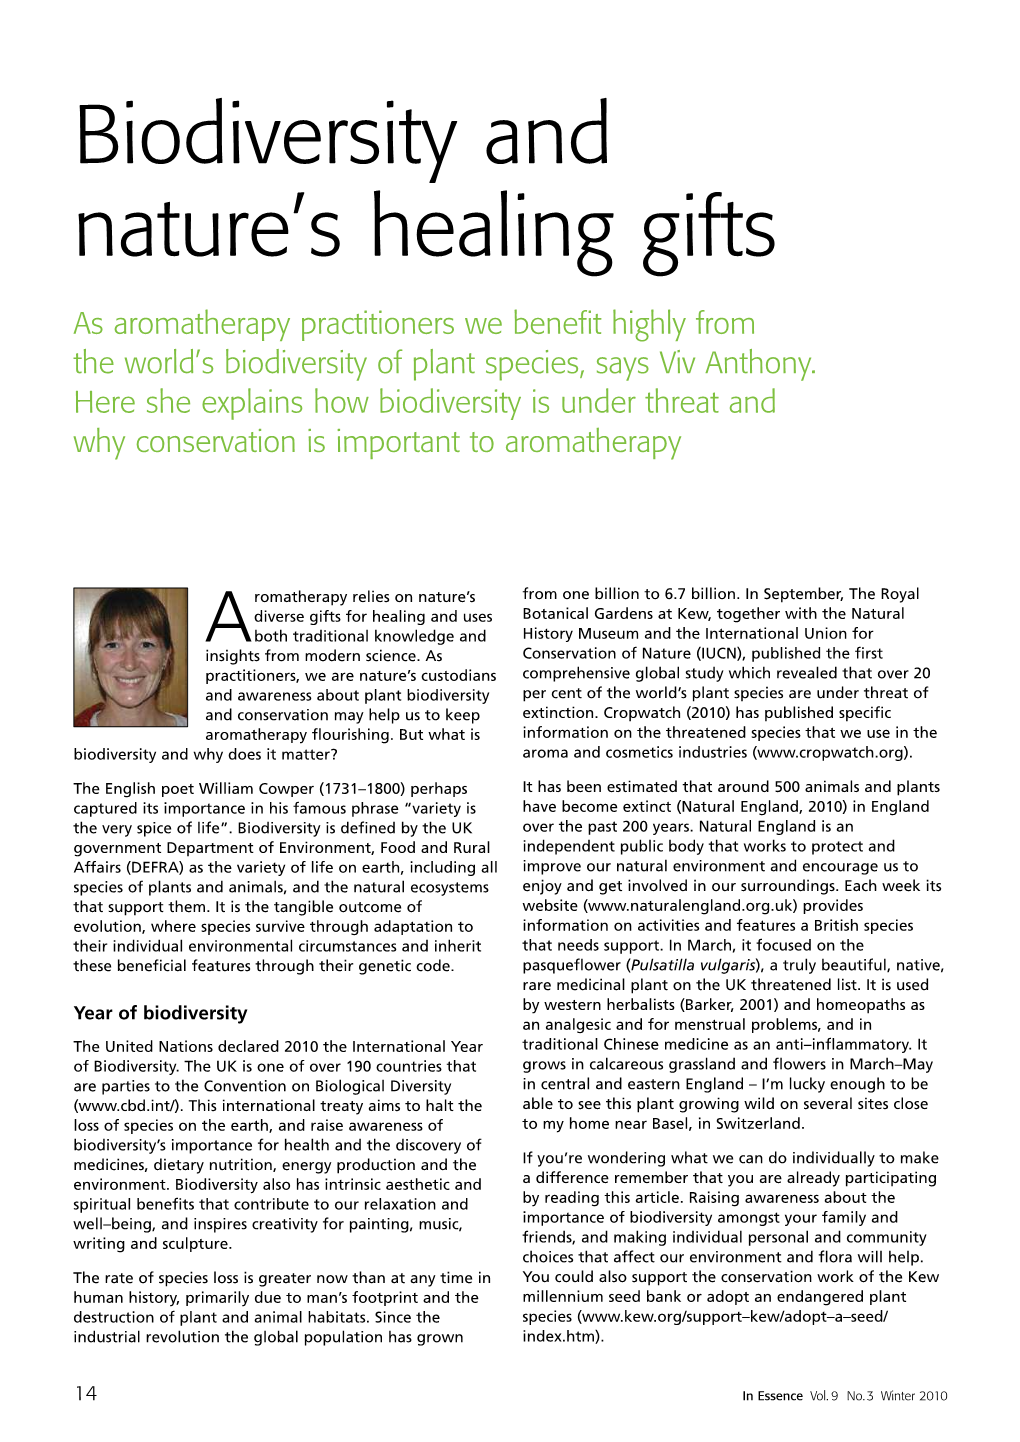 Biodiversity and Nature's Healing Gifts